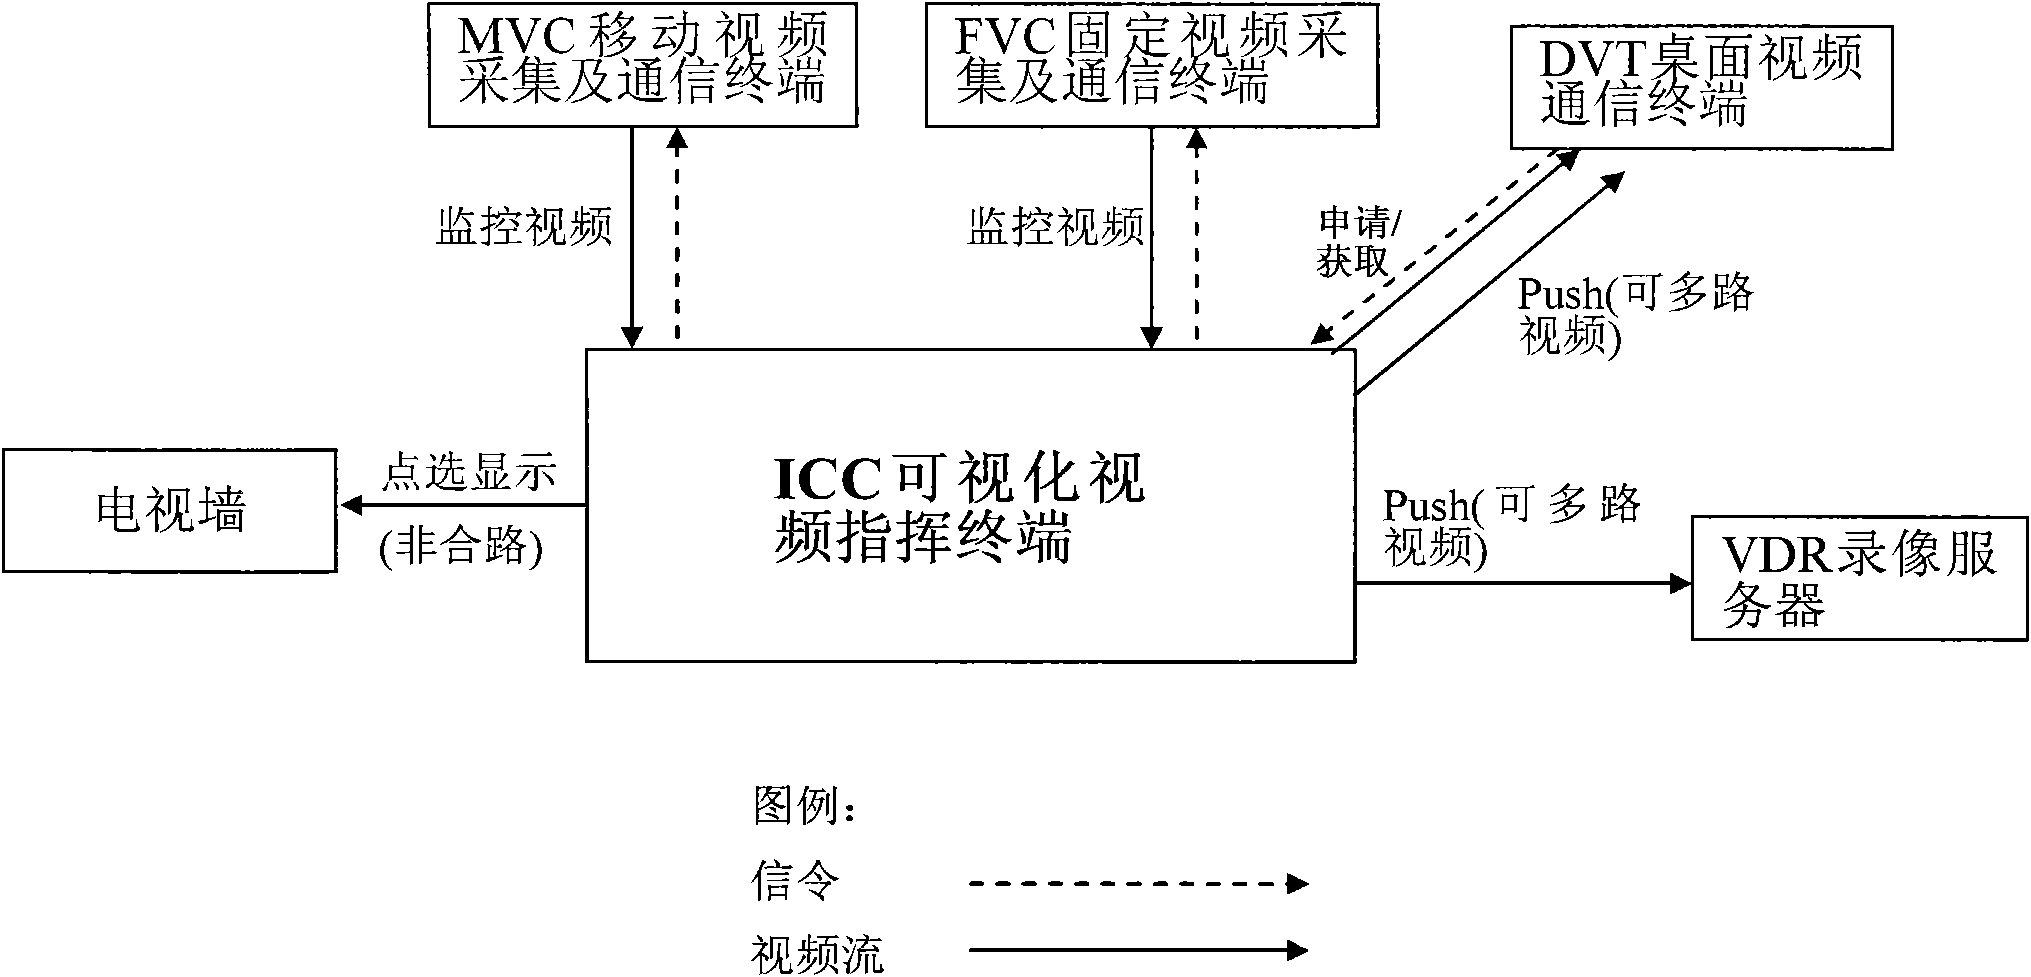 Video command/session system without MCU and method